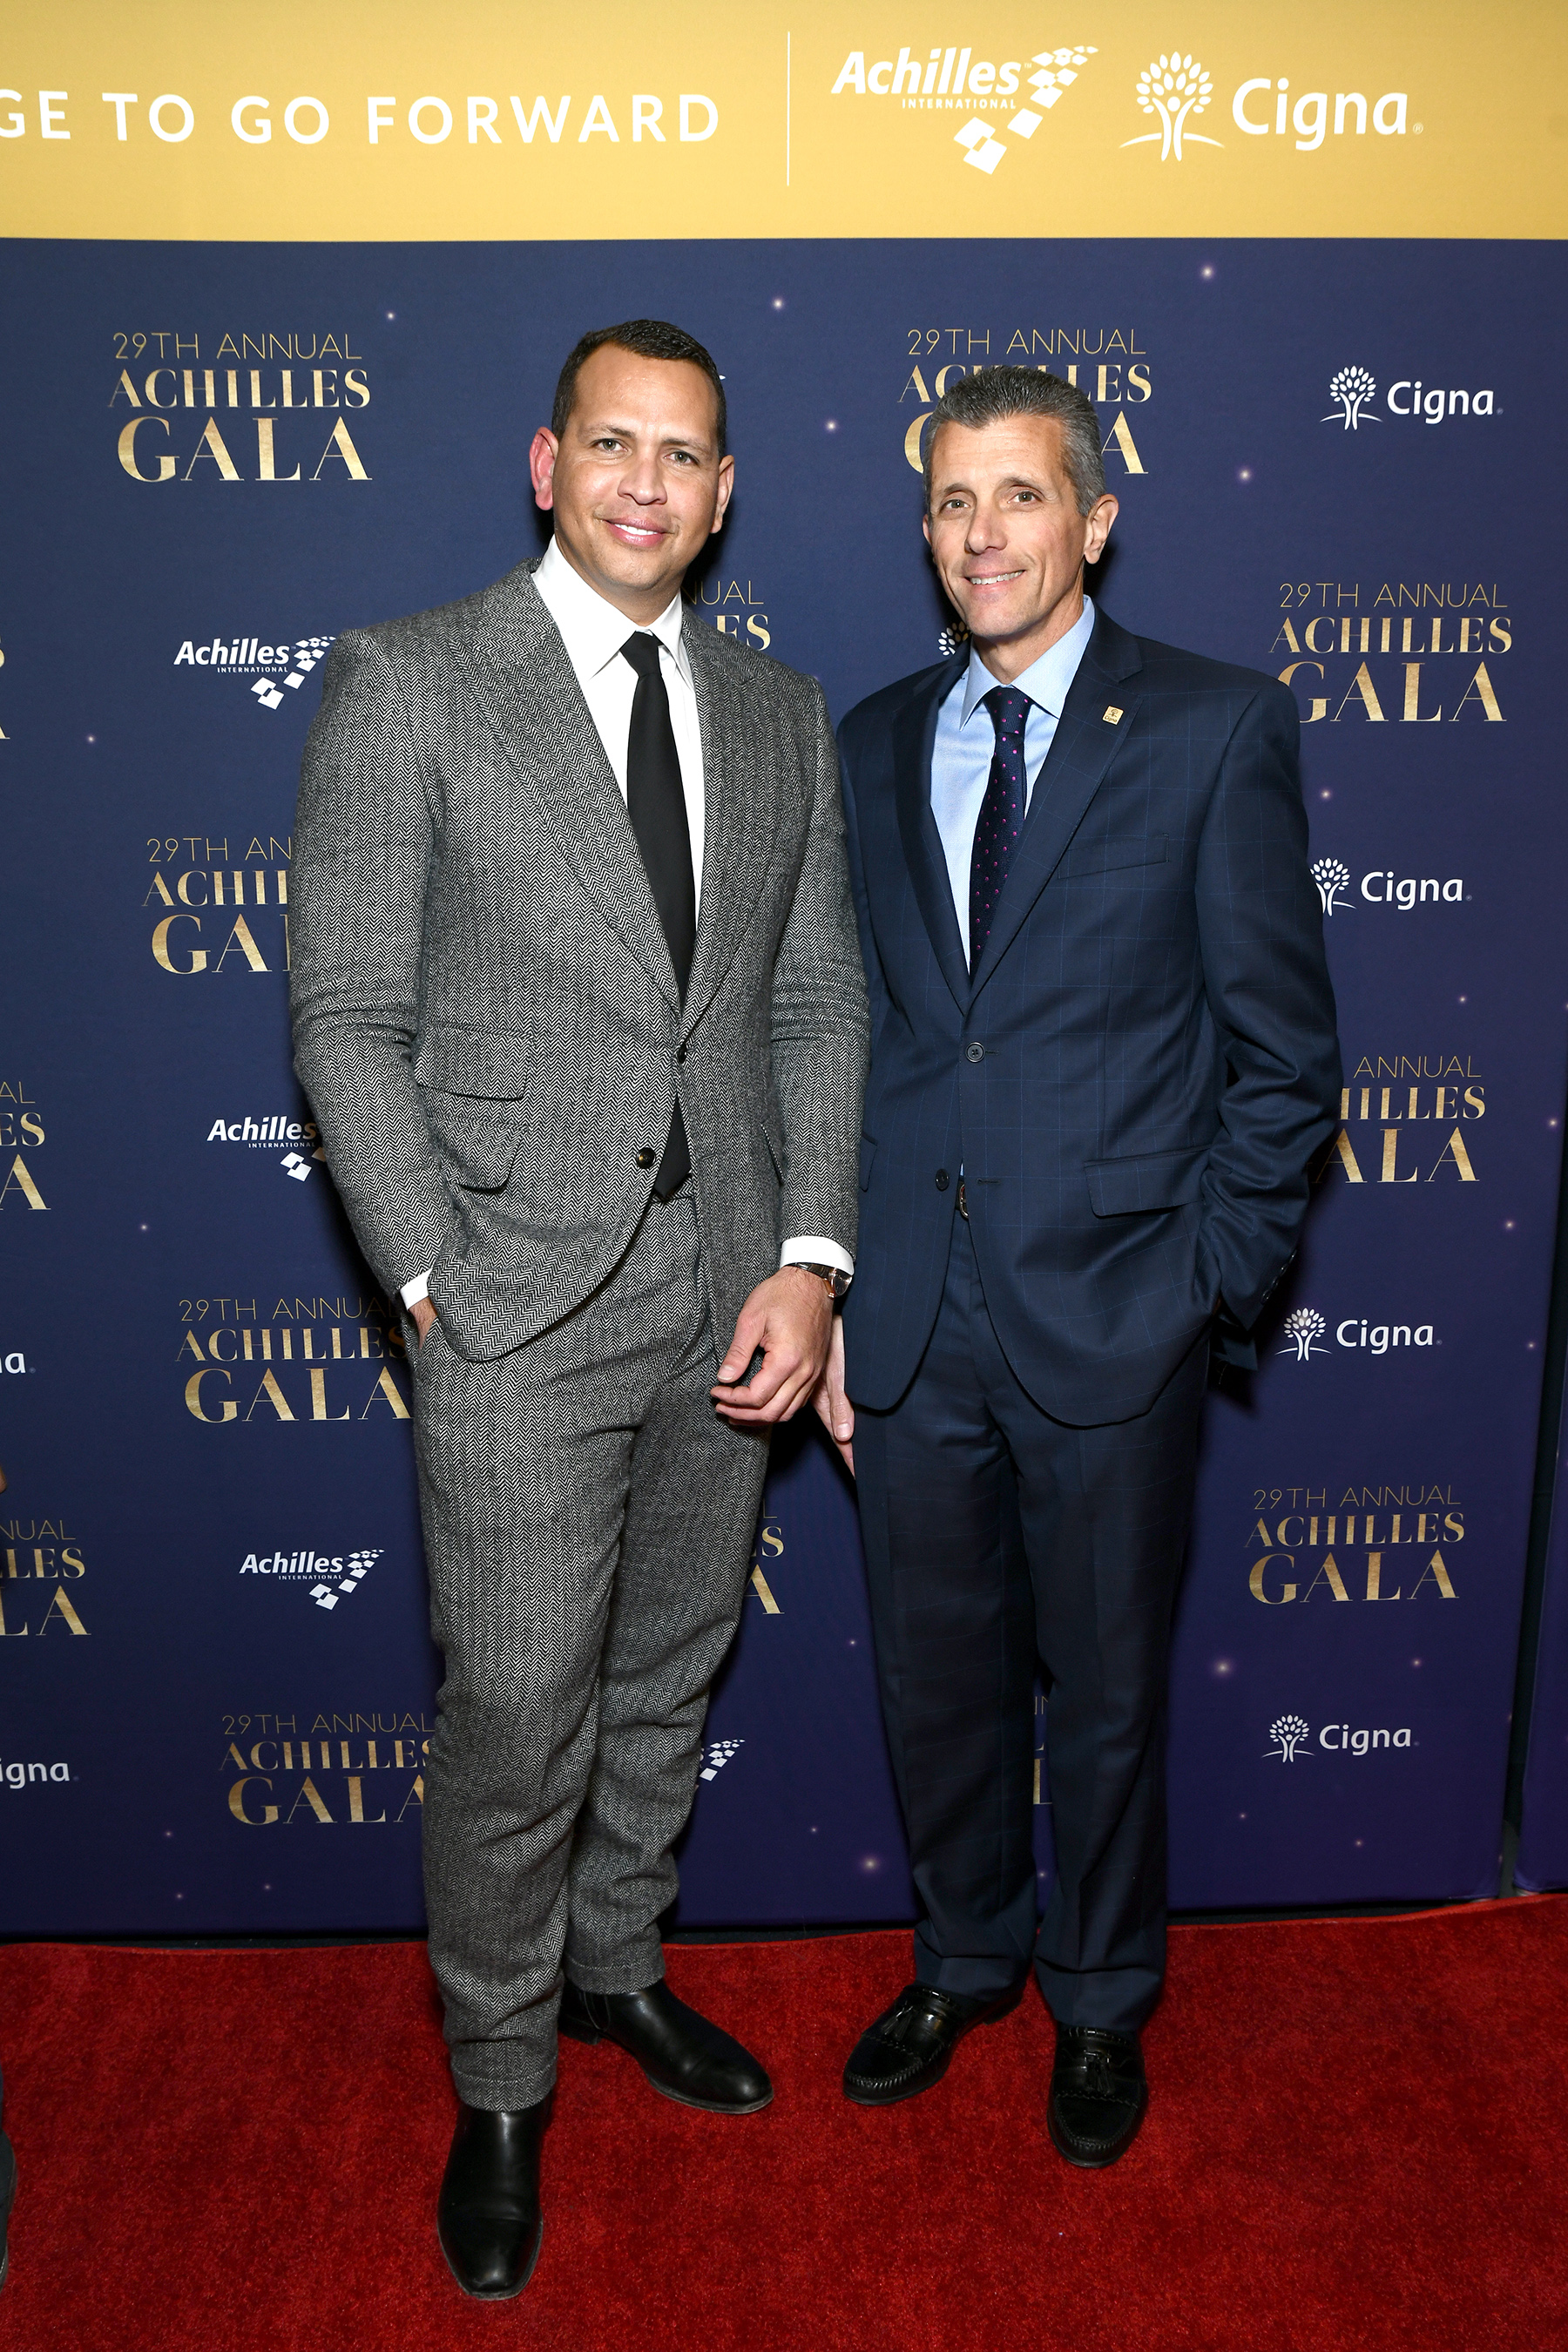 Cigna President and CEO David Cordani and baseball star Alex Rodriguez celebrate the courage of the Achilles International athletes at the Annual Gala.